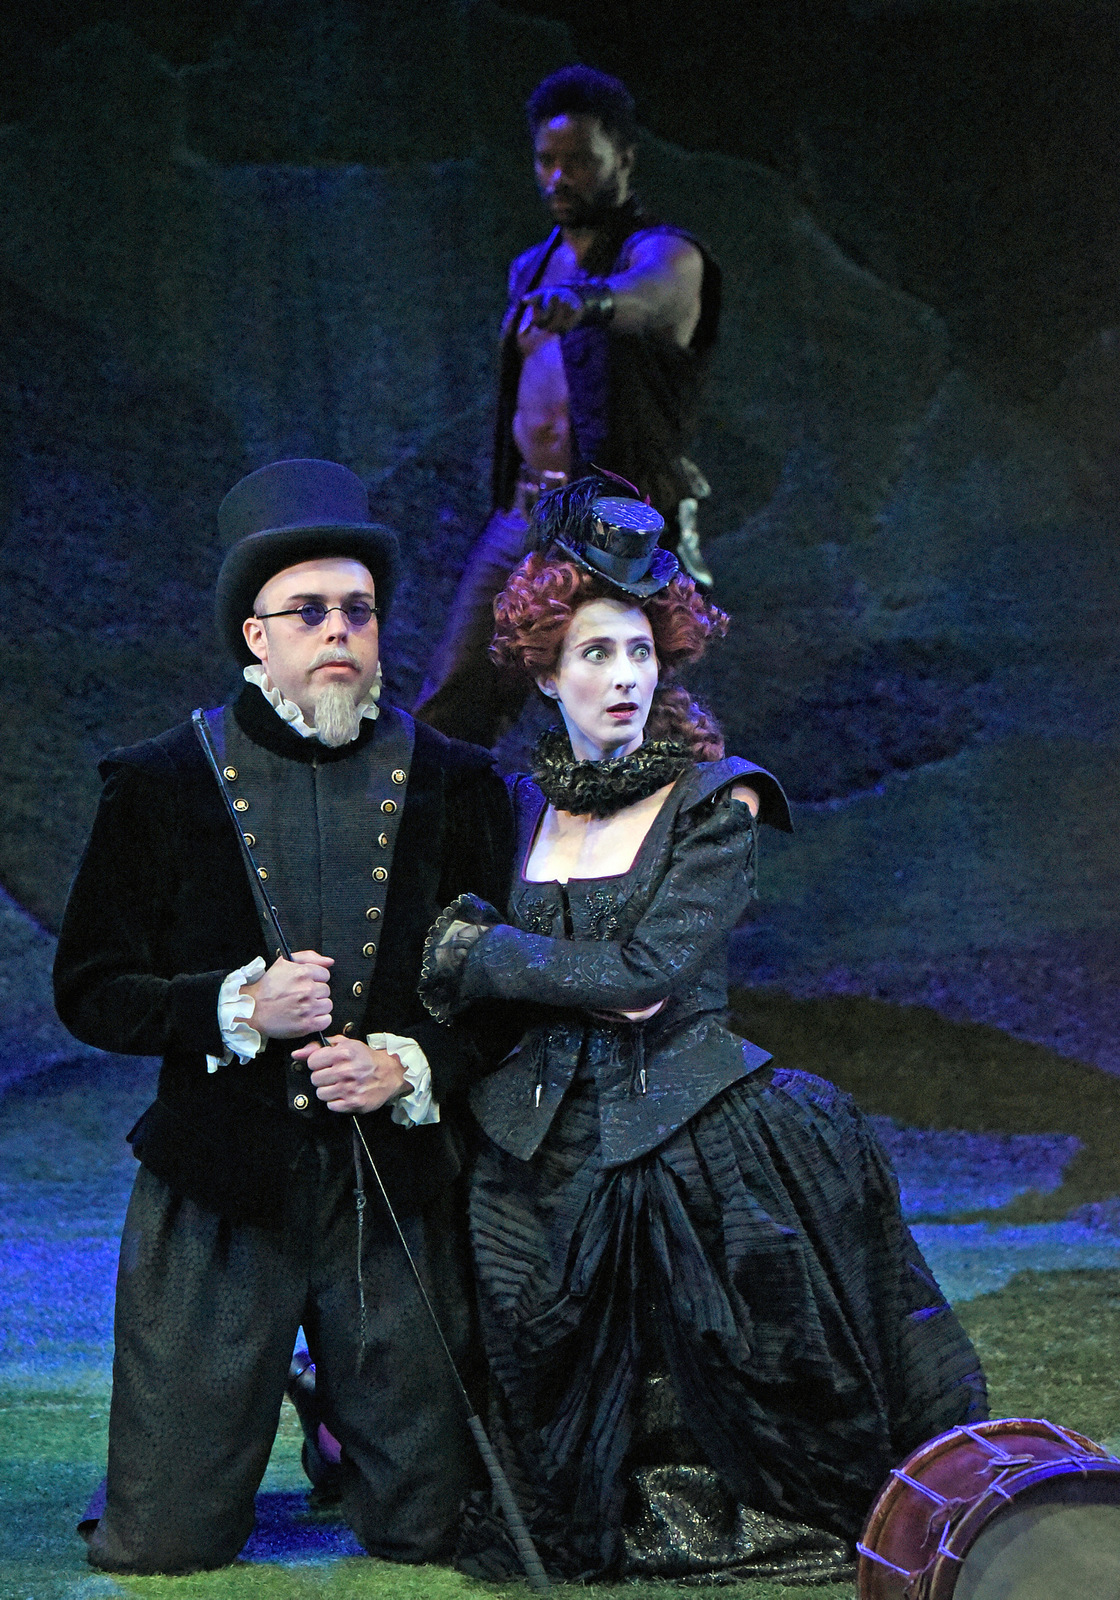 Vesturport and The Wallis’ The Heart of Robin Hood. Pictured (l-r): Ian Merrigan and Lize Johnston (Luke Forbes in background). Photo credit: Kevin Parry for The Wallis.